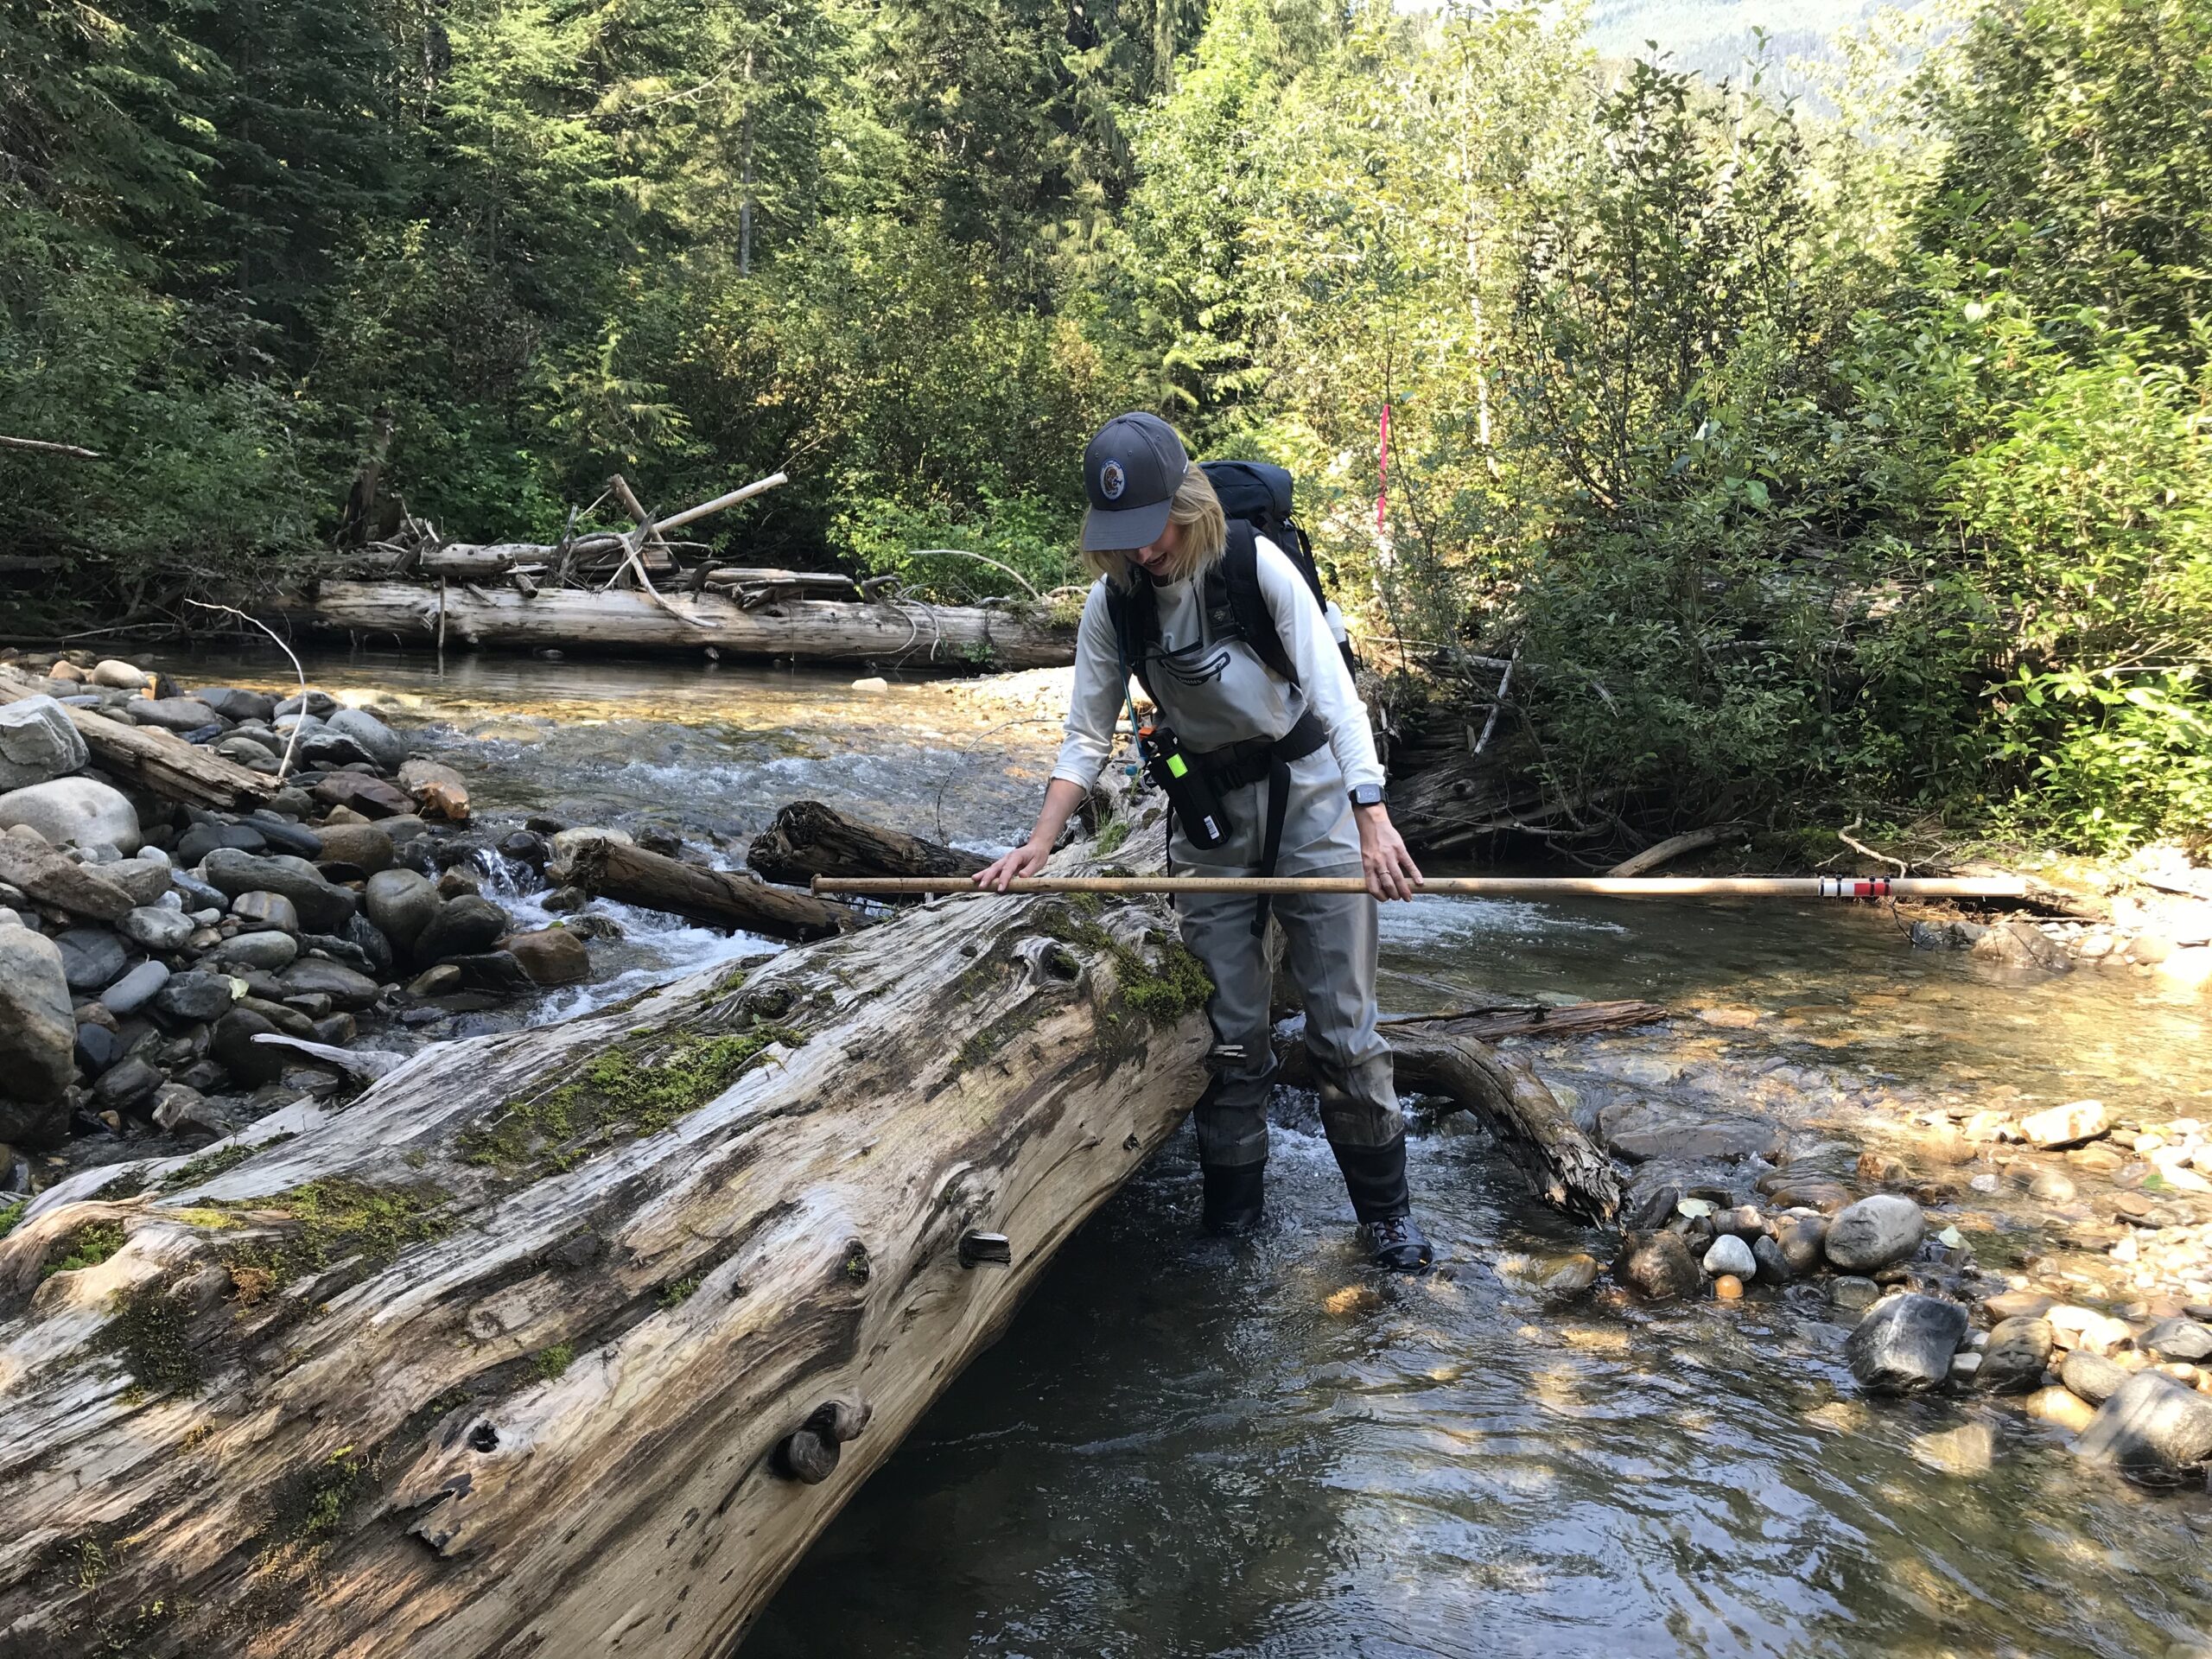 Brittany Milner, a field assistant and master's student at Simon Fraser University, wears waders and a ball cap as she measures a log in a creek